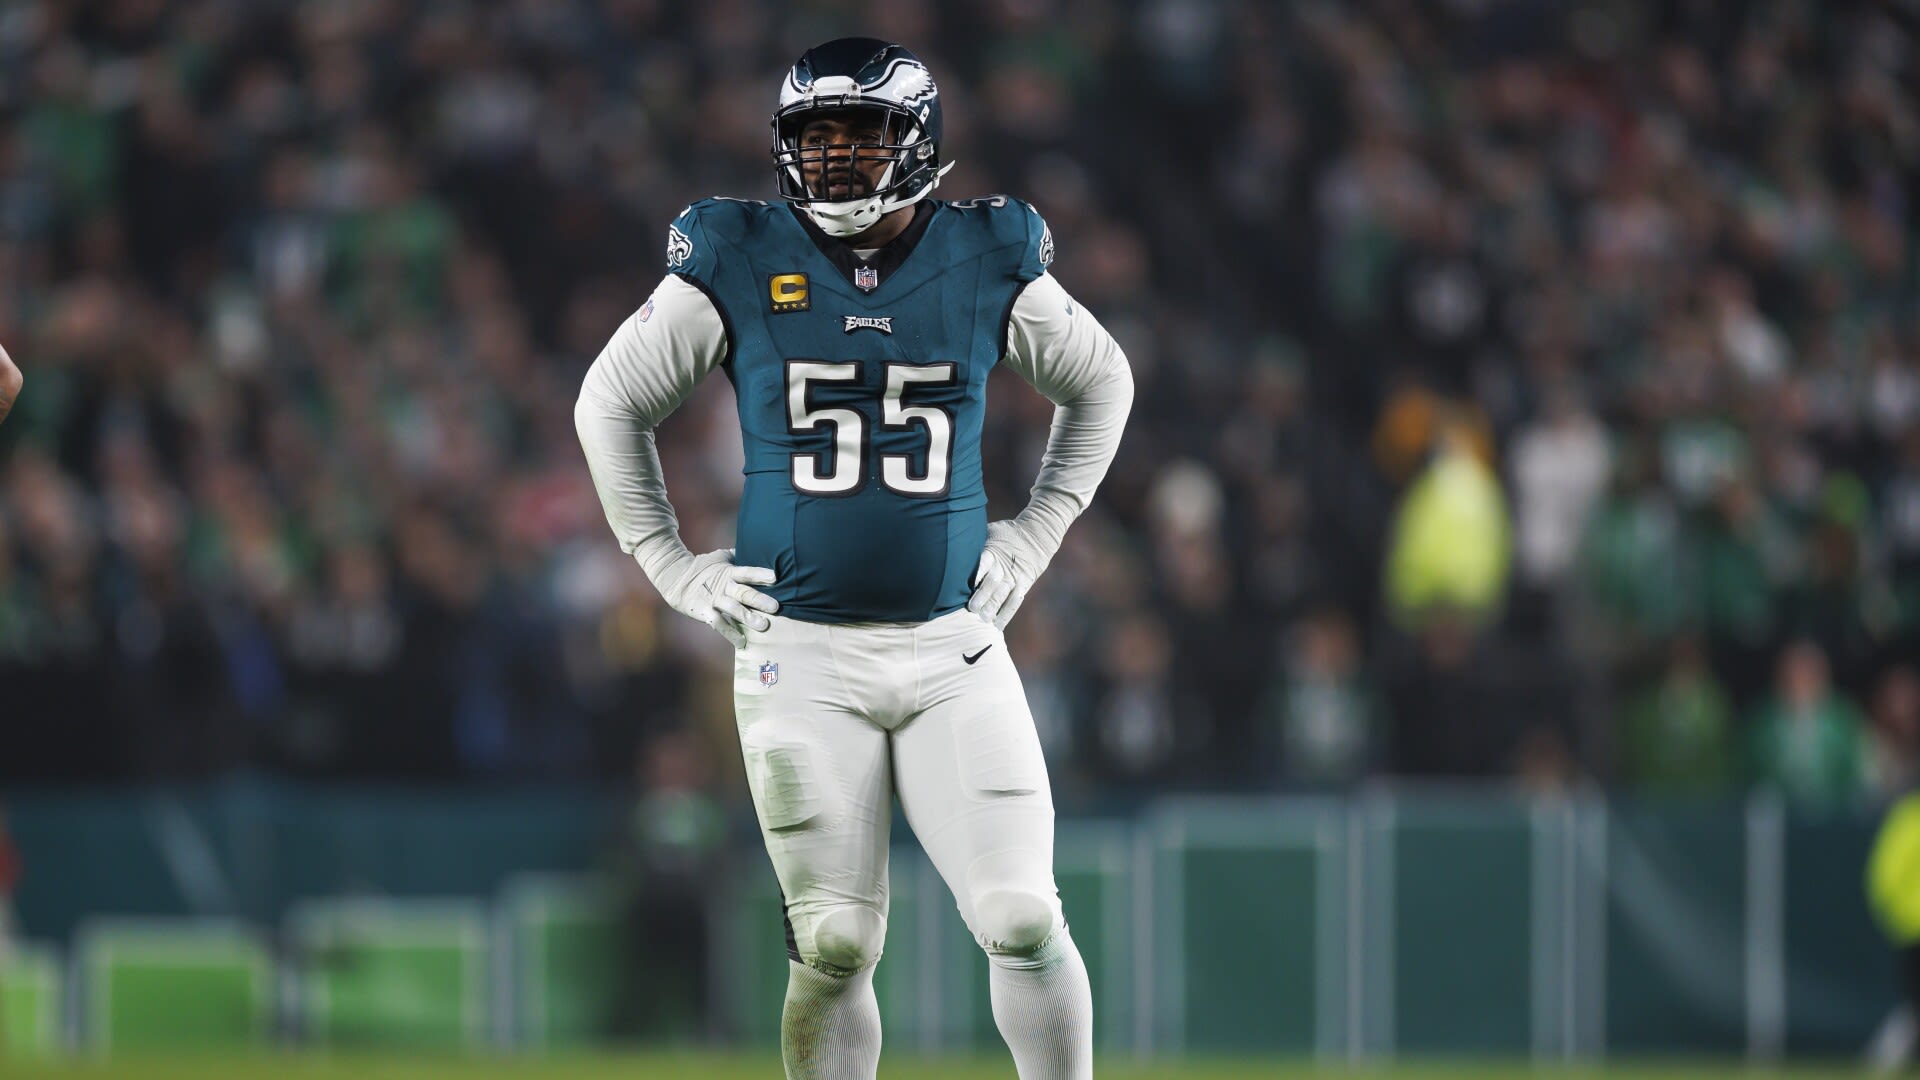 Brandon Graham: Last year, we didn't have all the right coaches in the right position